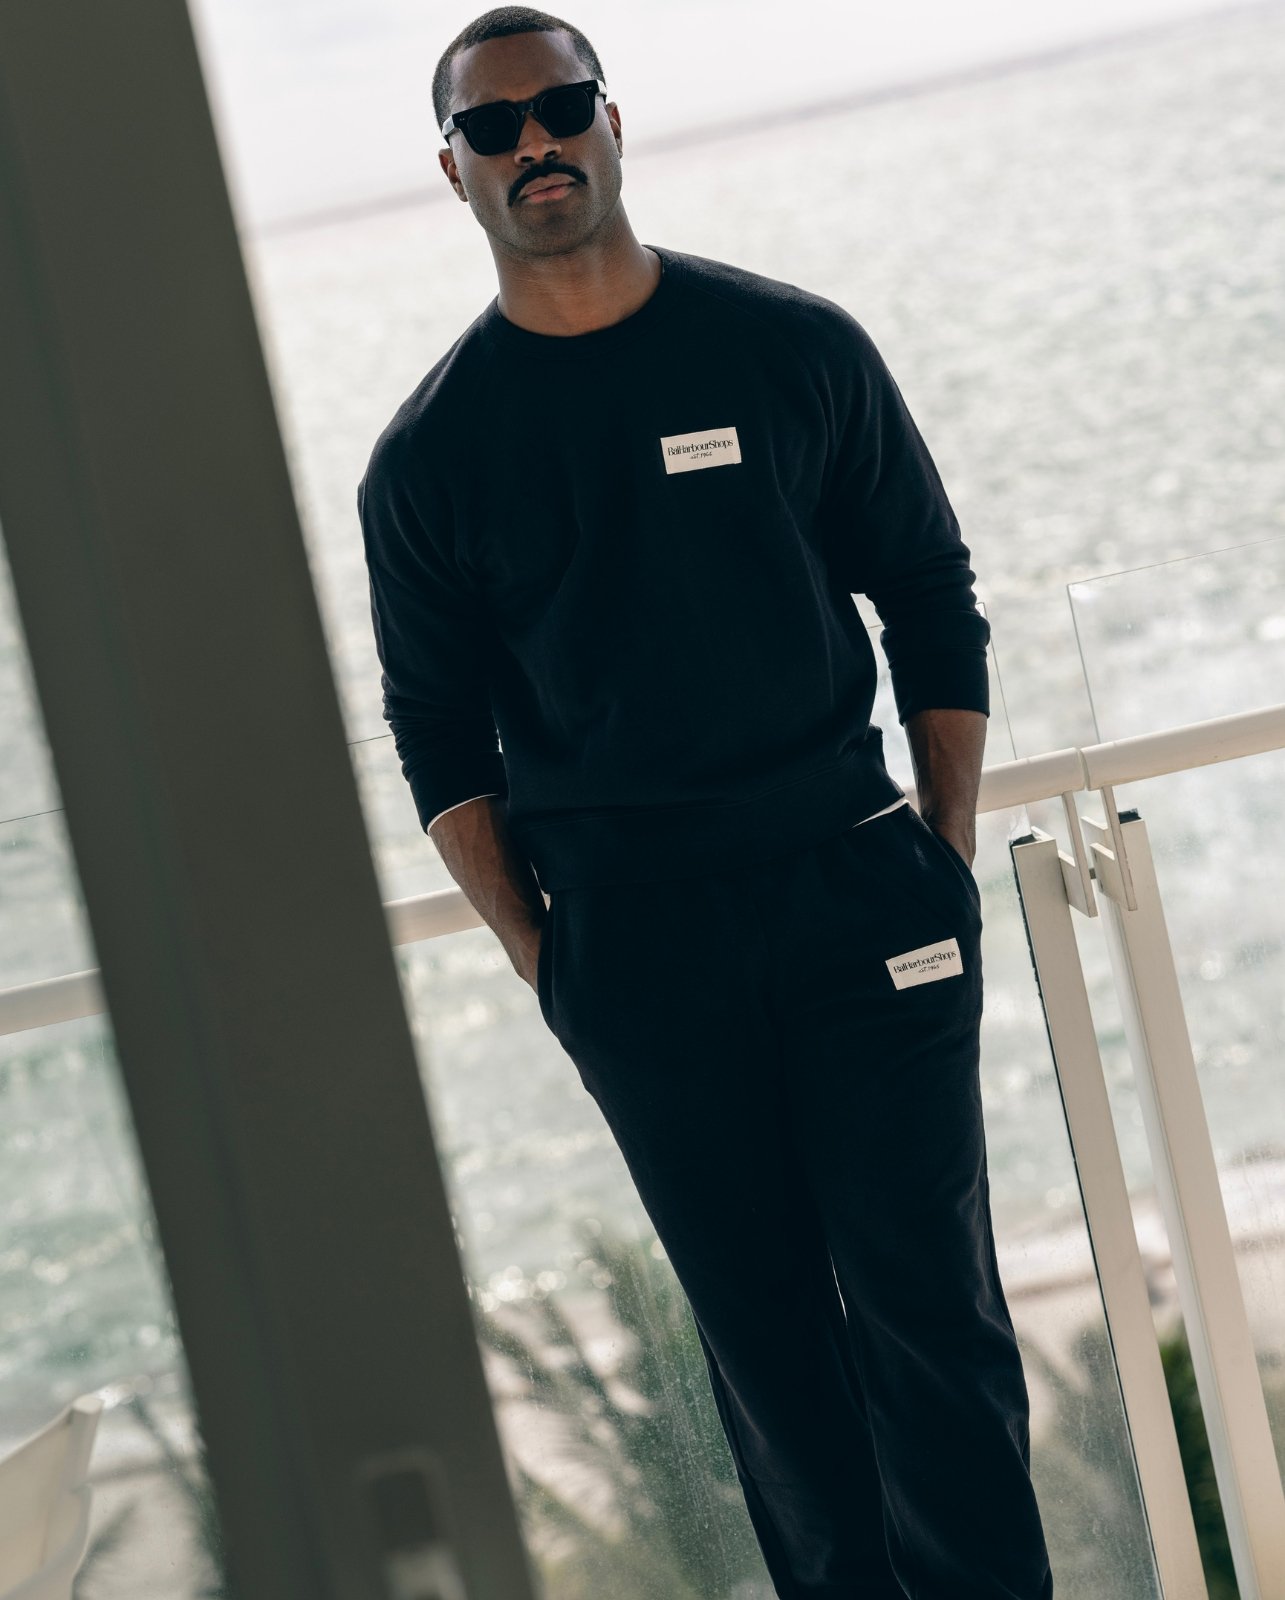 Lifestyle shot of male model styled in the black Bal Harbour Shops sweatsuit on balcony overlooking the ocean